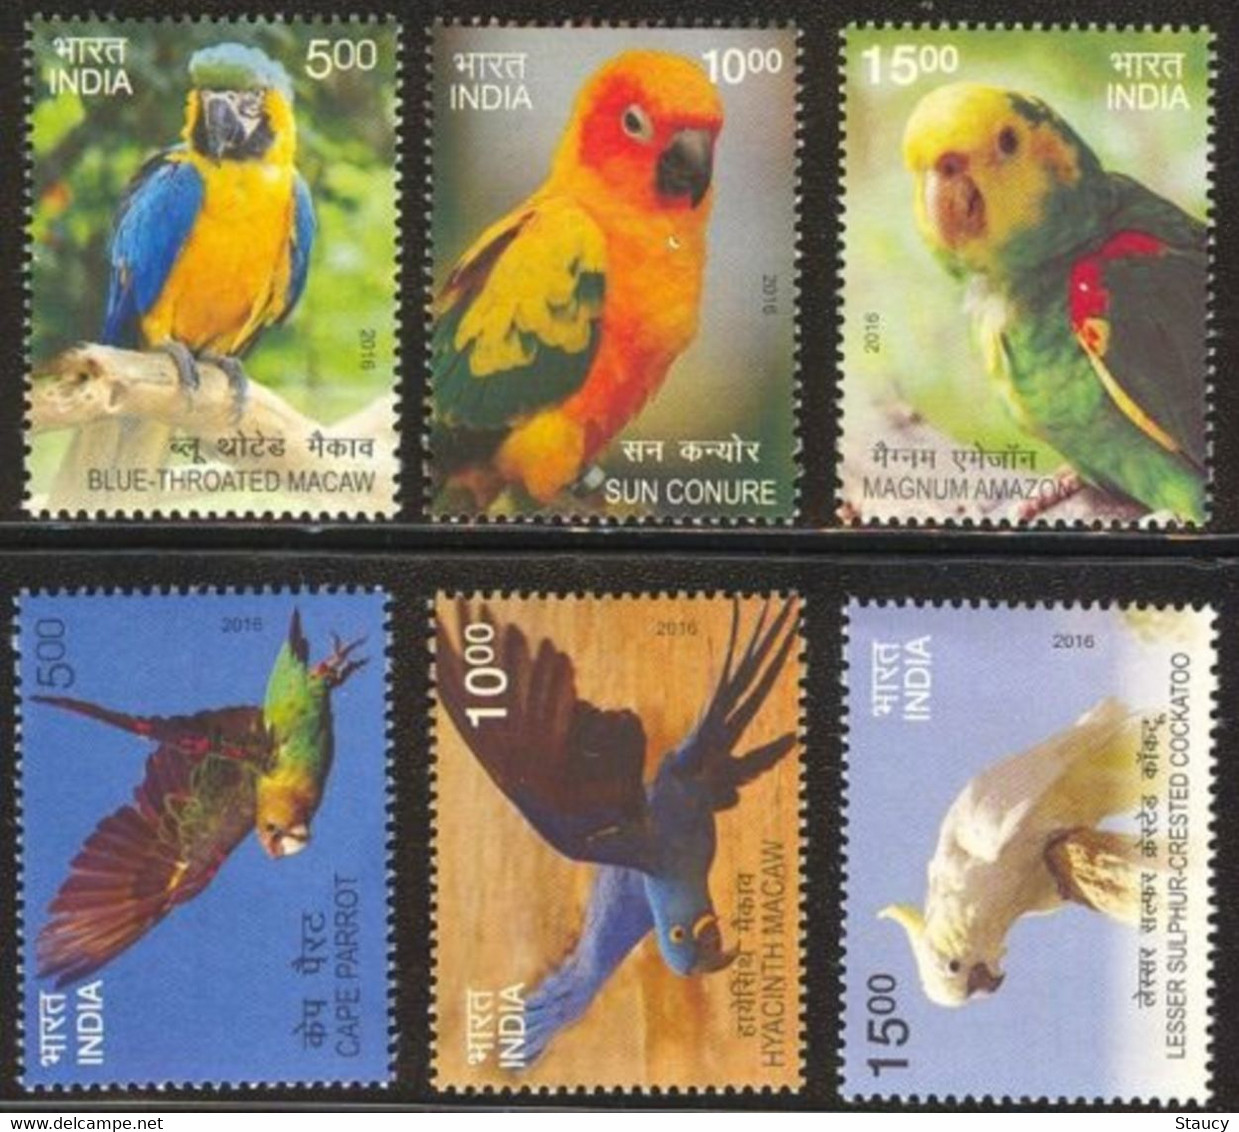 India 2016 Exotic Birds 6v Complete Set MNH Macaw Parrot Amazon Crested, As Per Scan - Cuco, Cuclillos